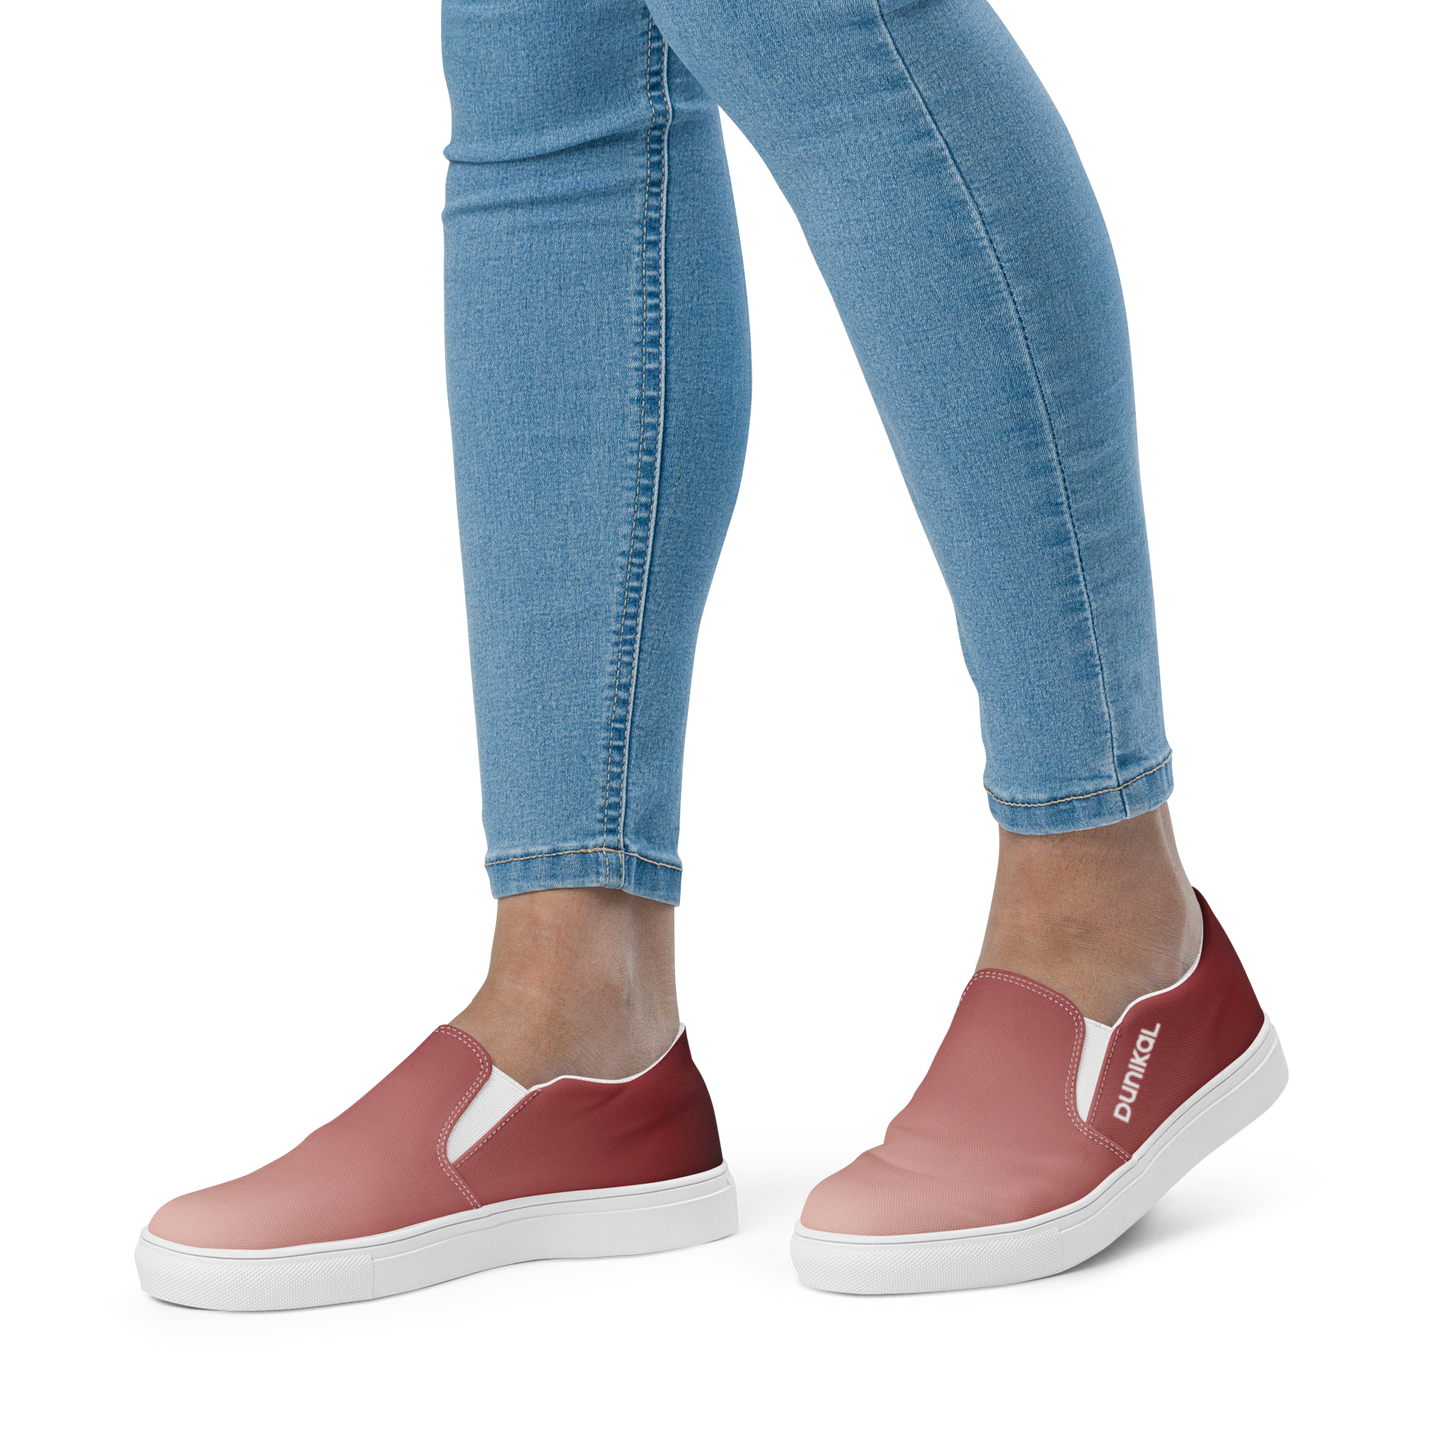 Women's Canvas Slip-Ons ❯ Pure Gradient ❯ Ruby Red